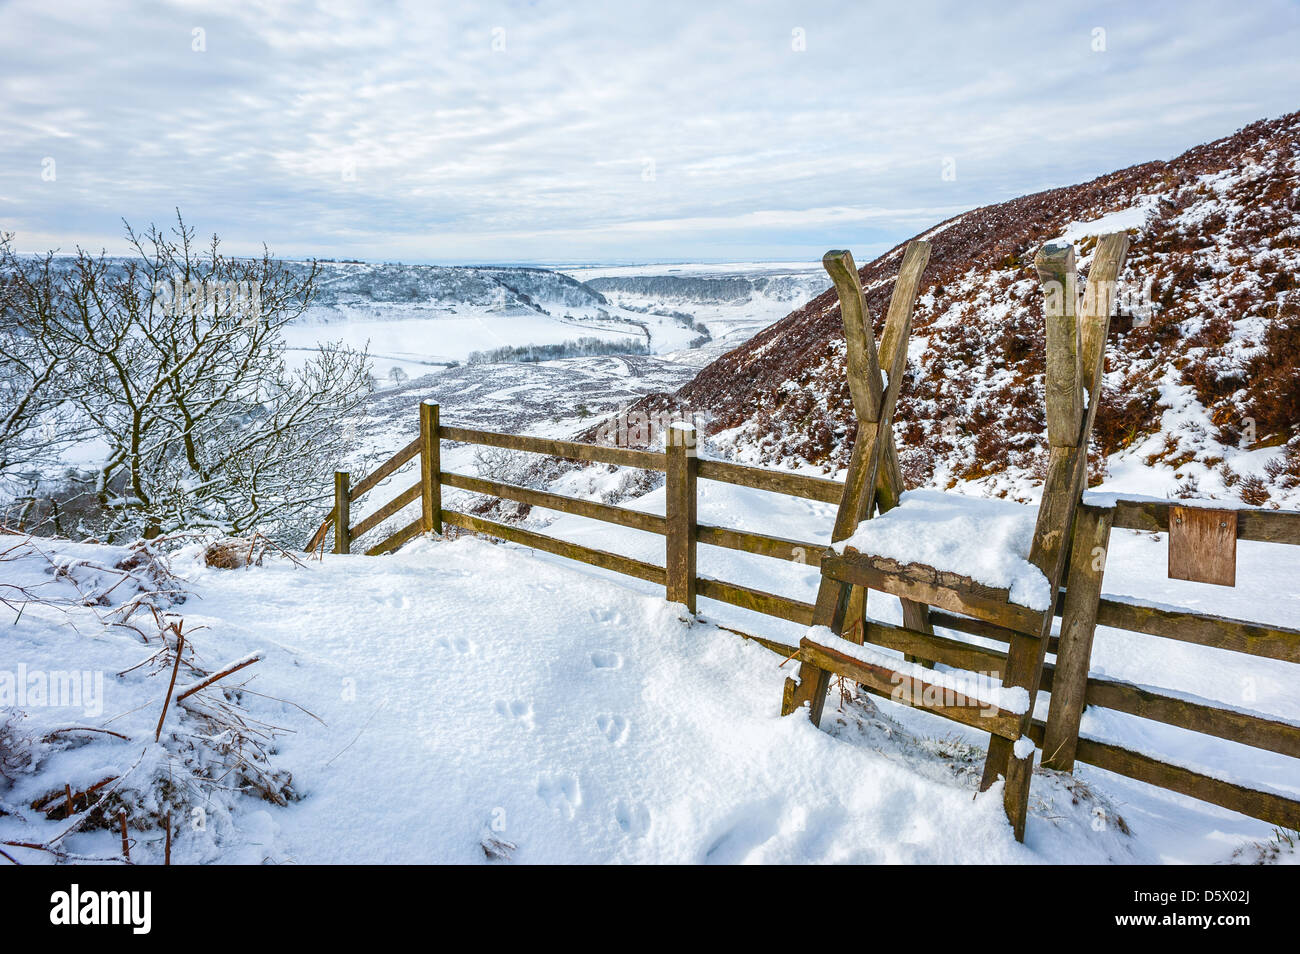 Rambler gate leading to Hole of Horcum on a beautiful winter landscape covered in snow near Goathland, Yorkshire, UK. Stock Photo